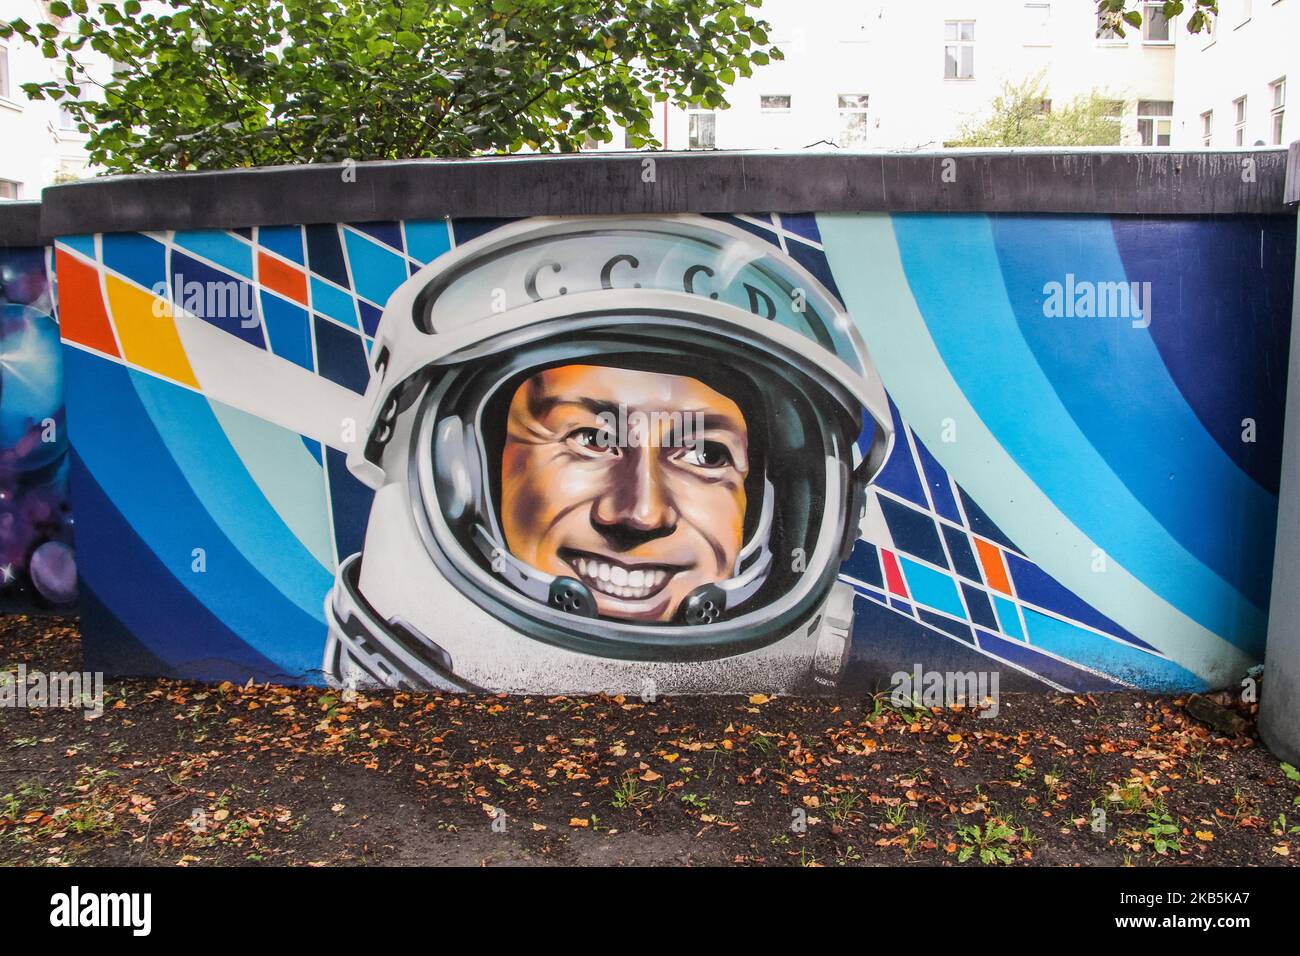 Mural with Alexei Leonov (Alexei Arkhipovich Leonov) portrait wearing space helmet is seen in Kaliningrad, Russia, on 8 September 2019 Leonov is the first man to walk in space, and honorary citizen of Kaliningrad. On 18.03.1965, he became the first human to conduct extravehicular activity (EVA), exiting the capsule during the Voskhod 2 mission for a 12-minute spacewalk. (Photo by Michal Fludra/NurPhoto) Stock Photo